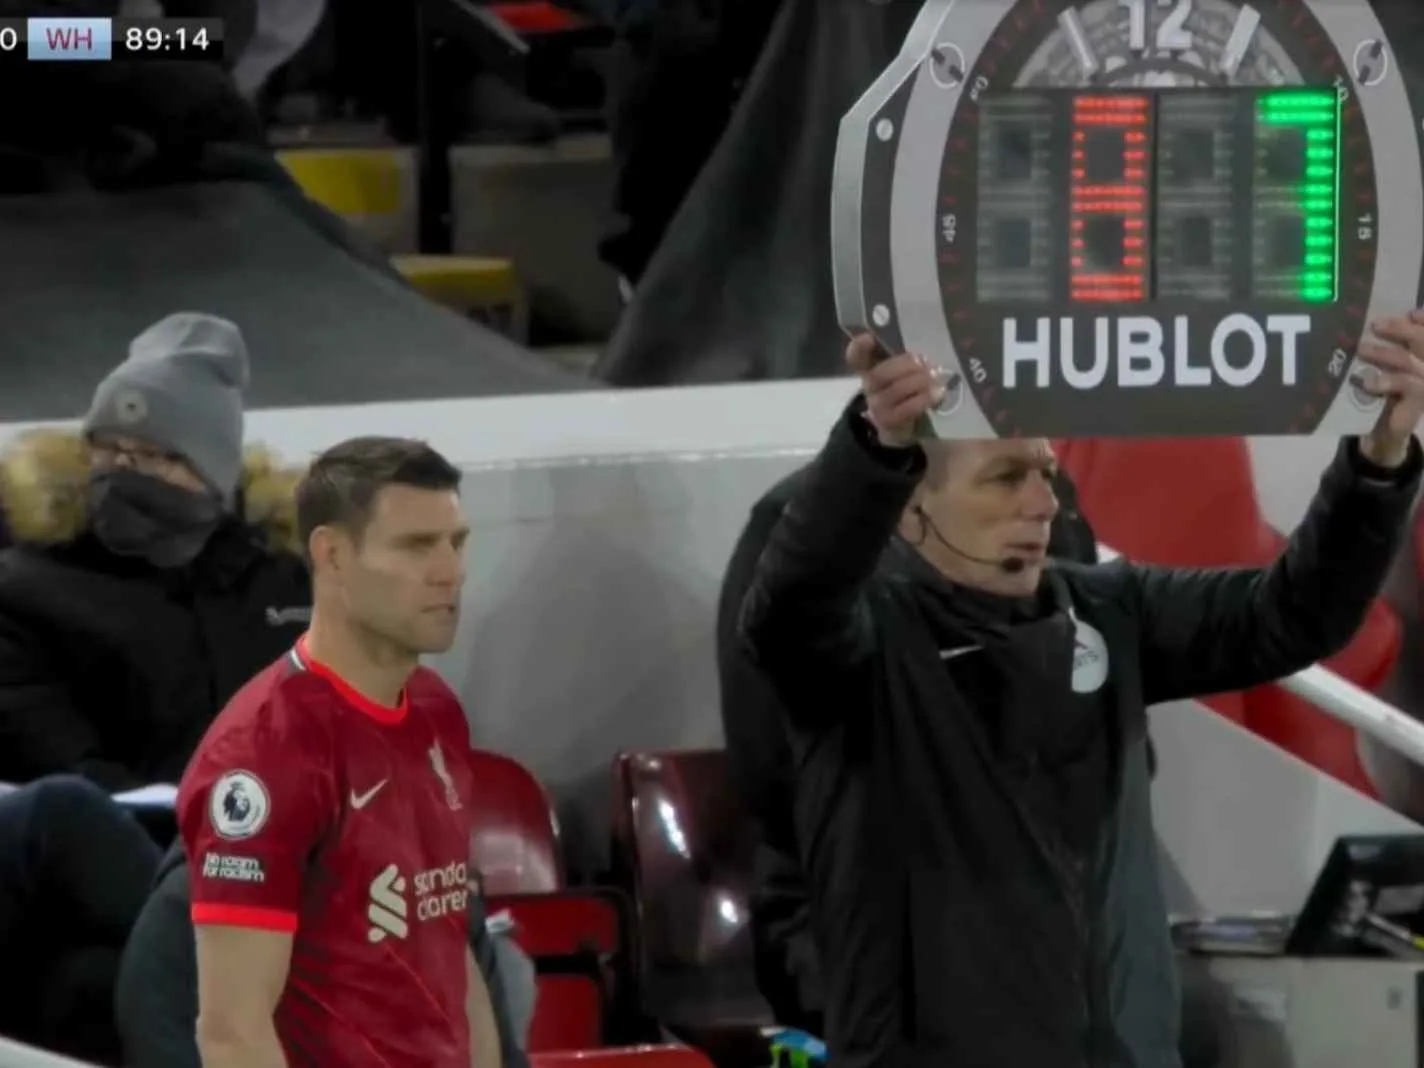 James Milner showed his experience with a simple maneuver after he came on as substitute against West Ham